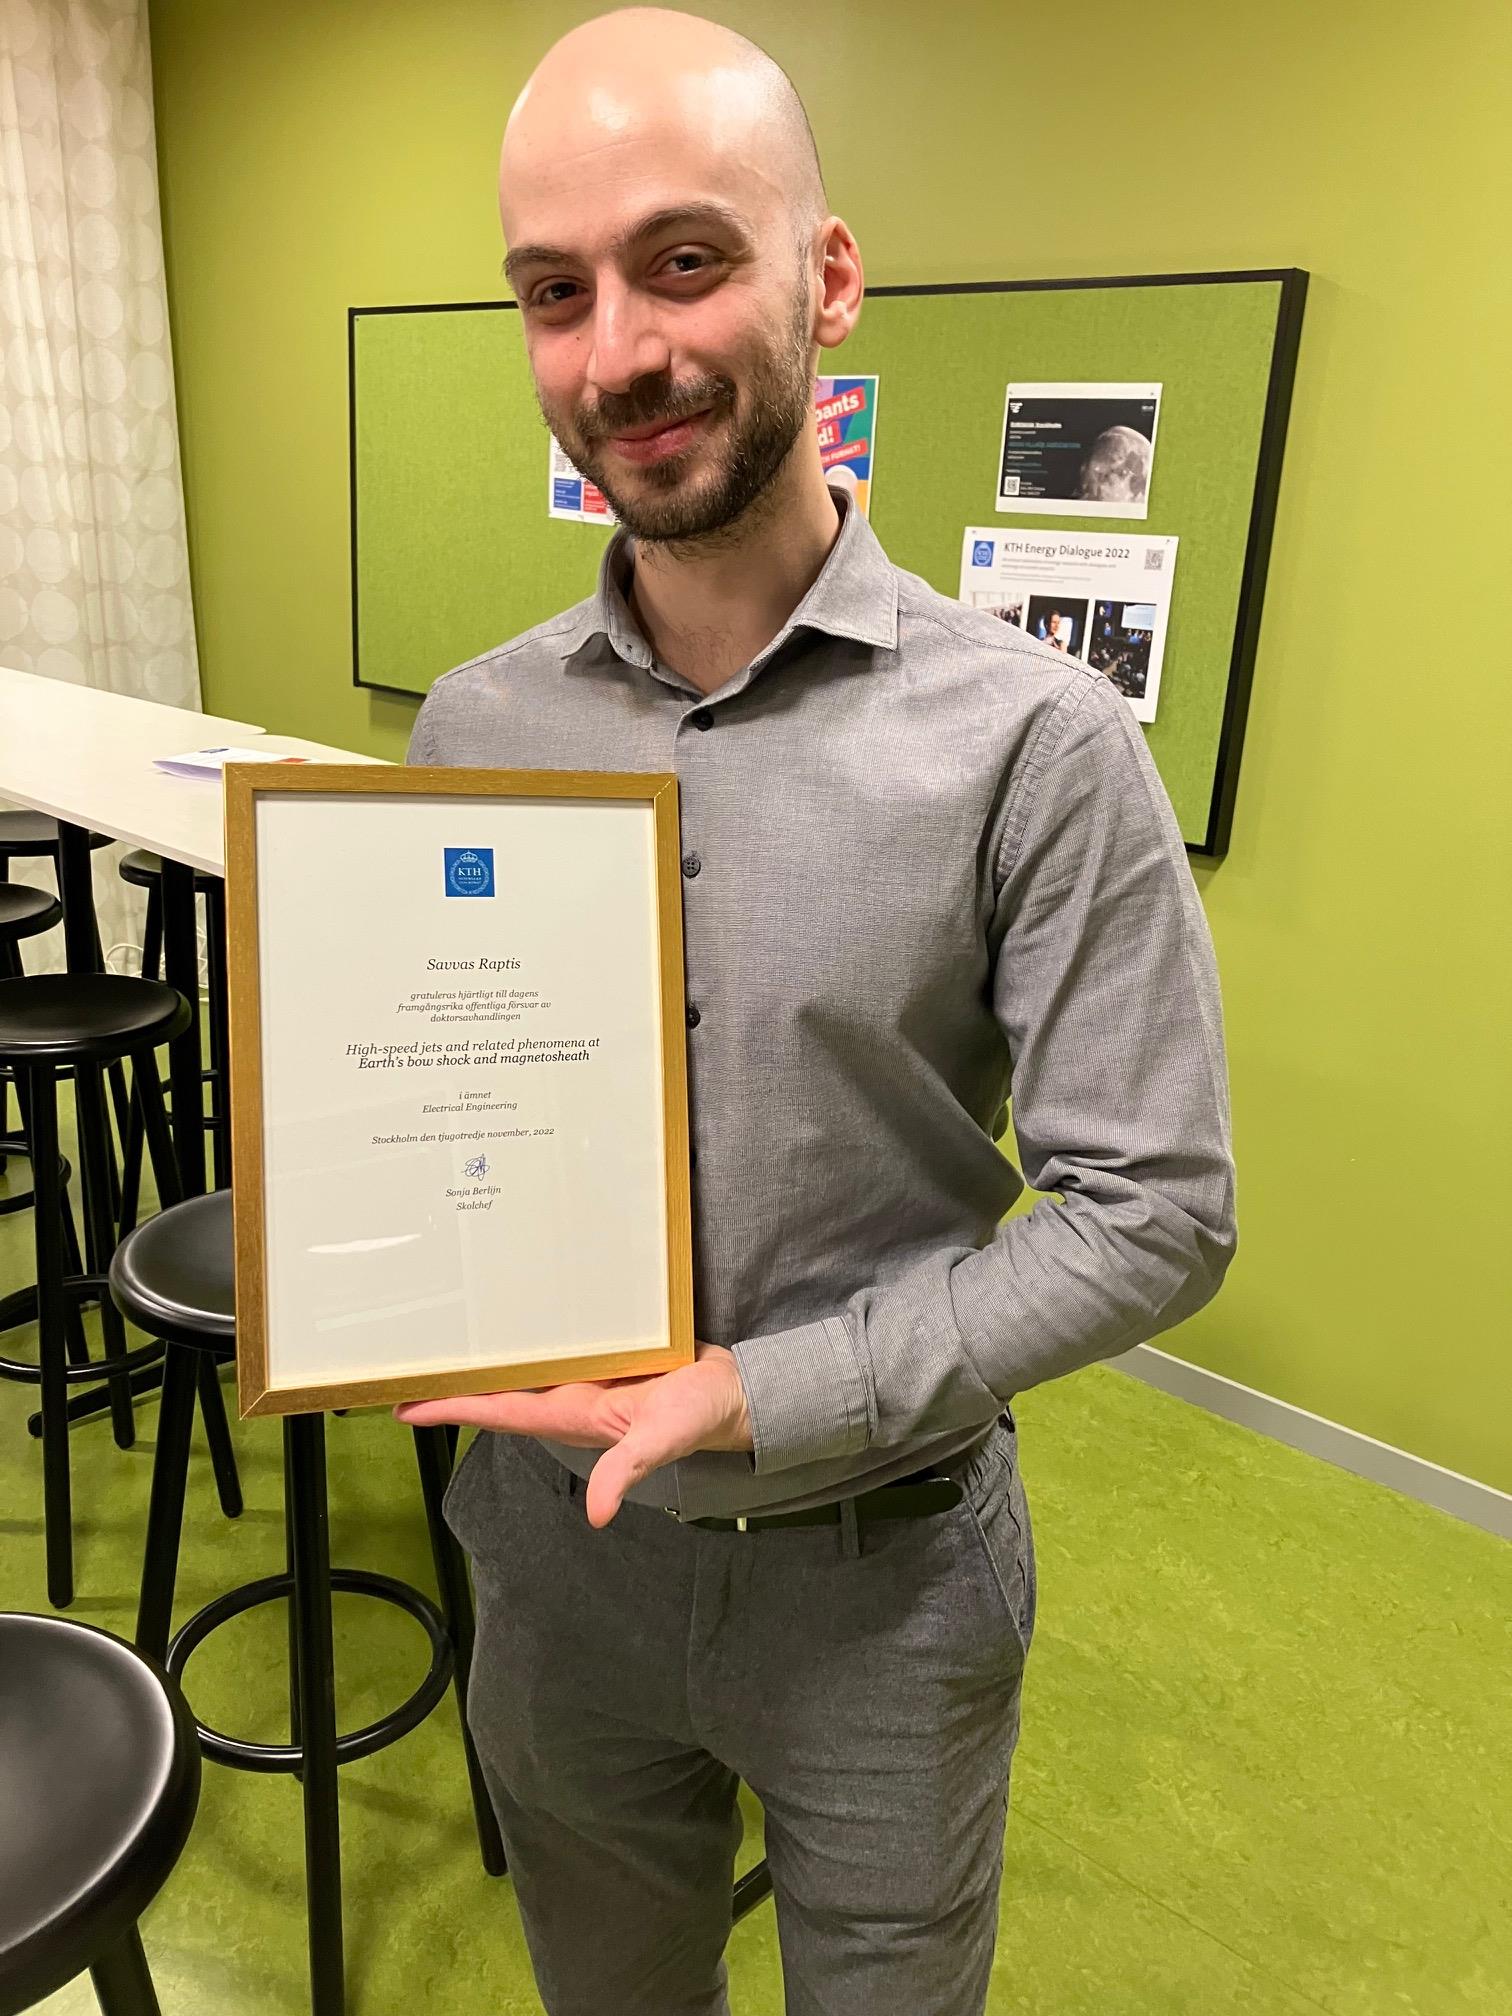 Savvas with his diploma after the successful defense.